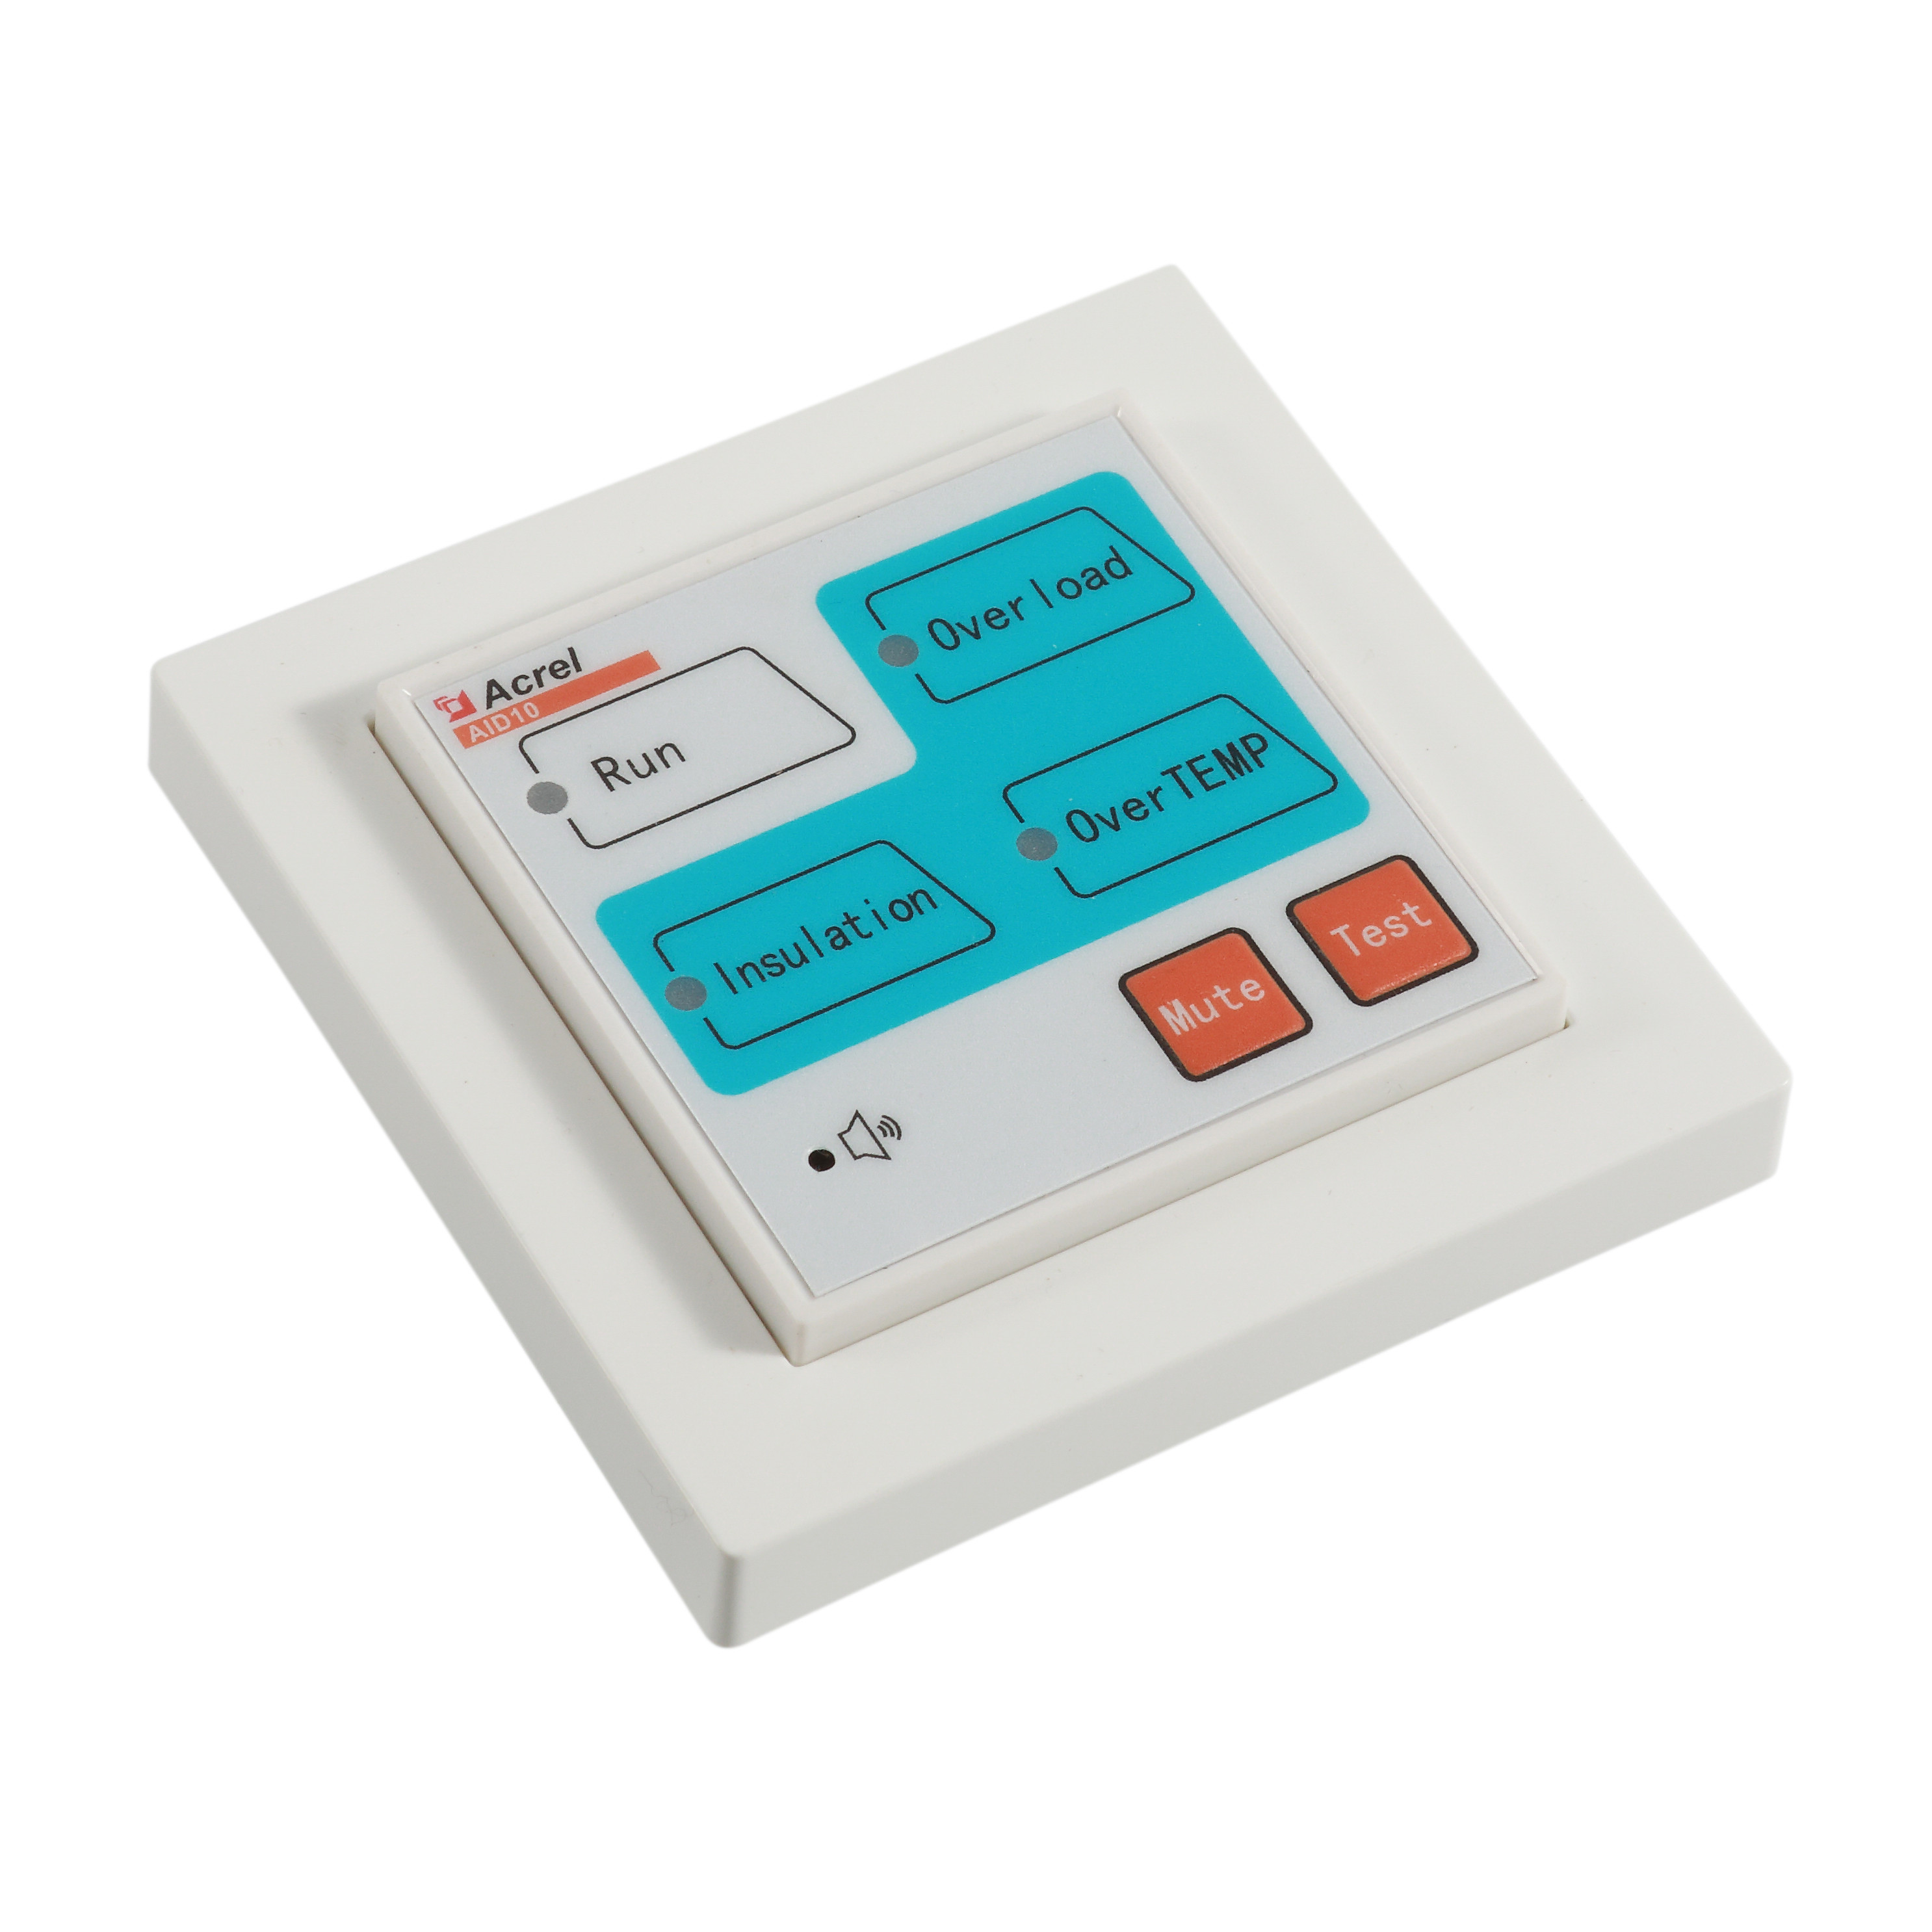  RS485 Hospital Isolated Power System Centralized Alarm Display Device AID10 Manufactures